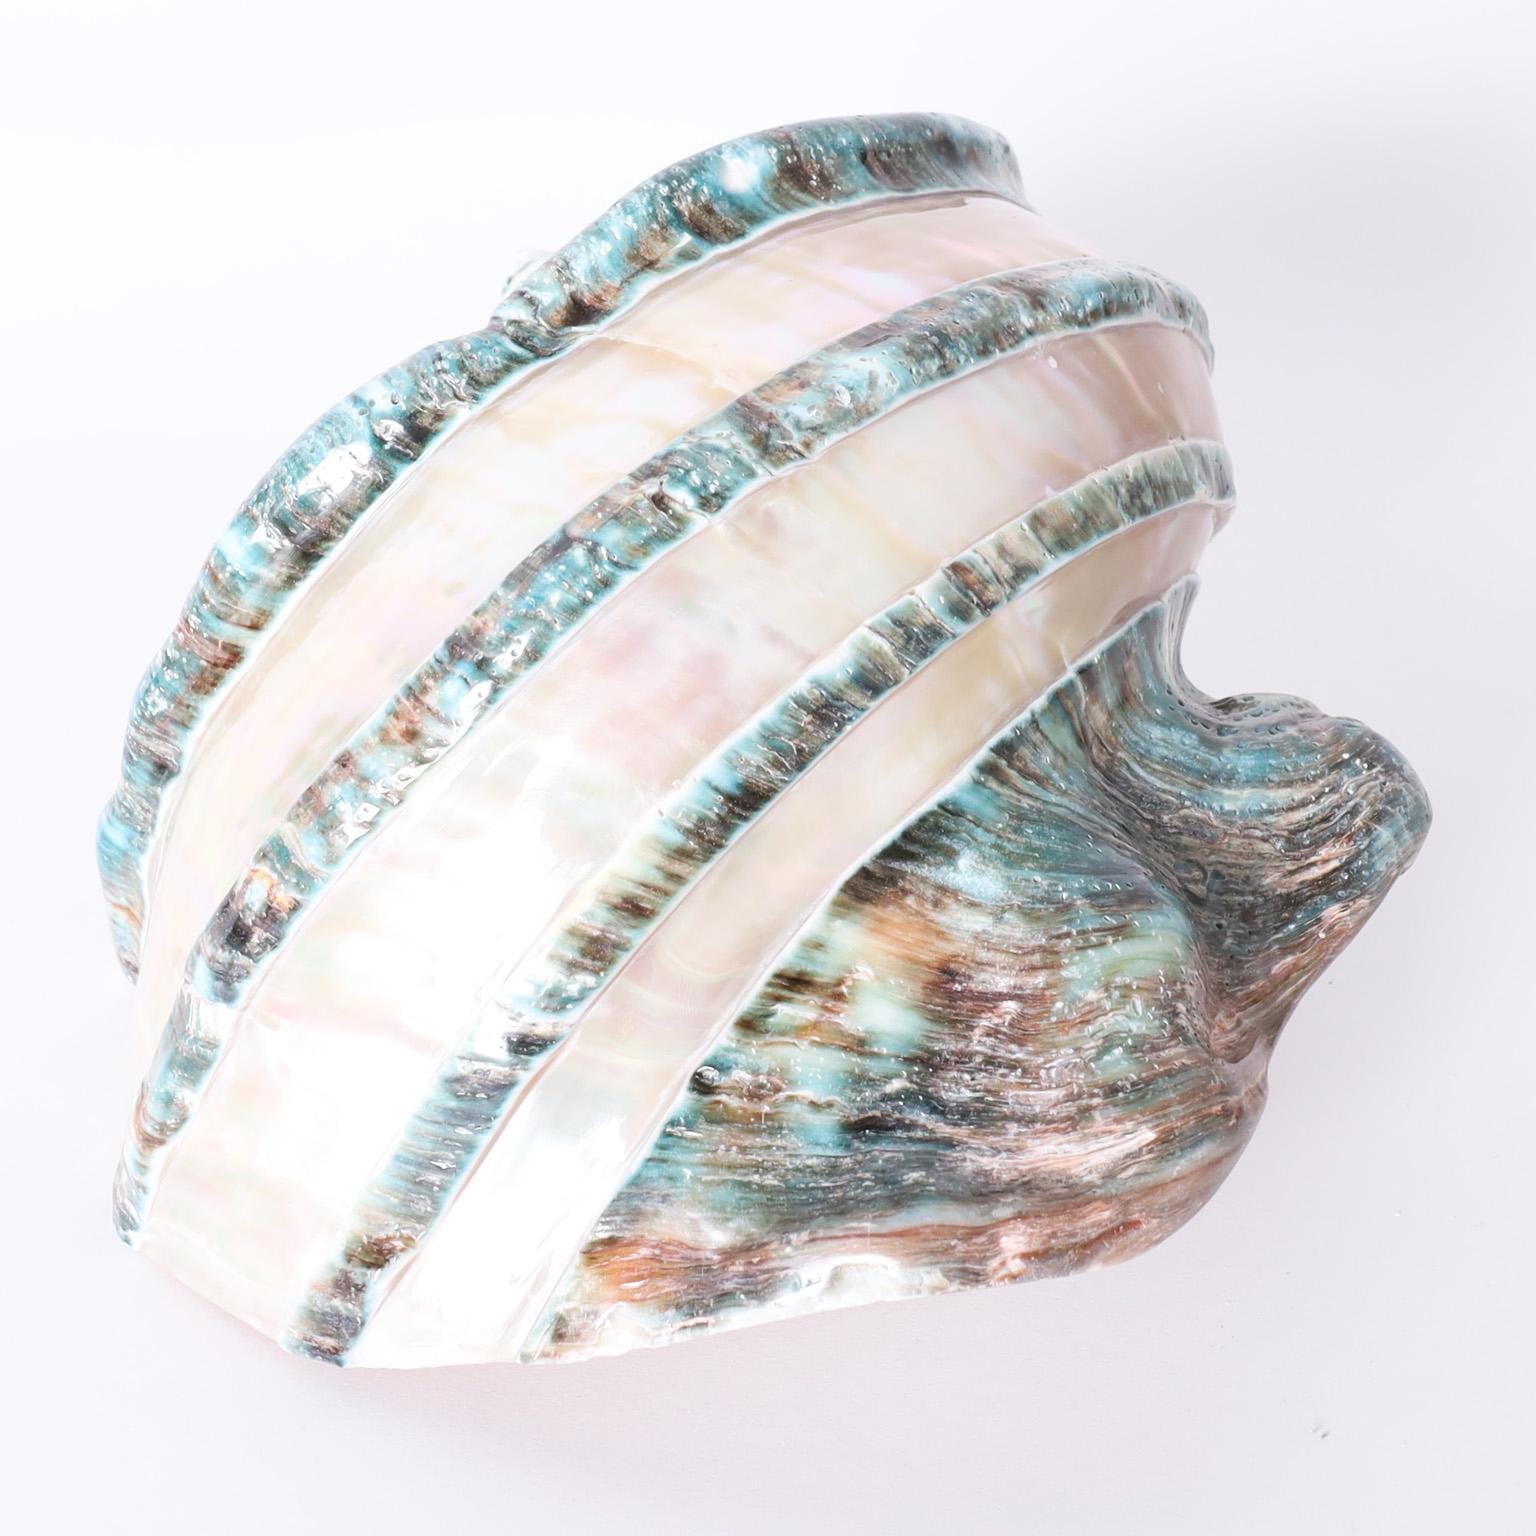 Organic Modern Giant Banded Turbo Shells, Priced Individually For Sale